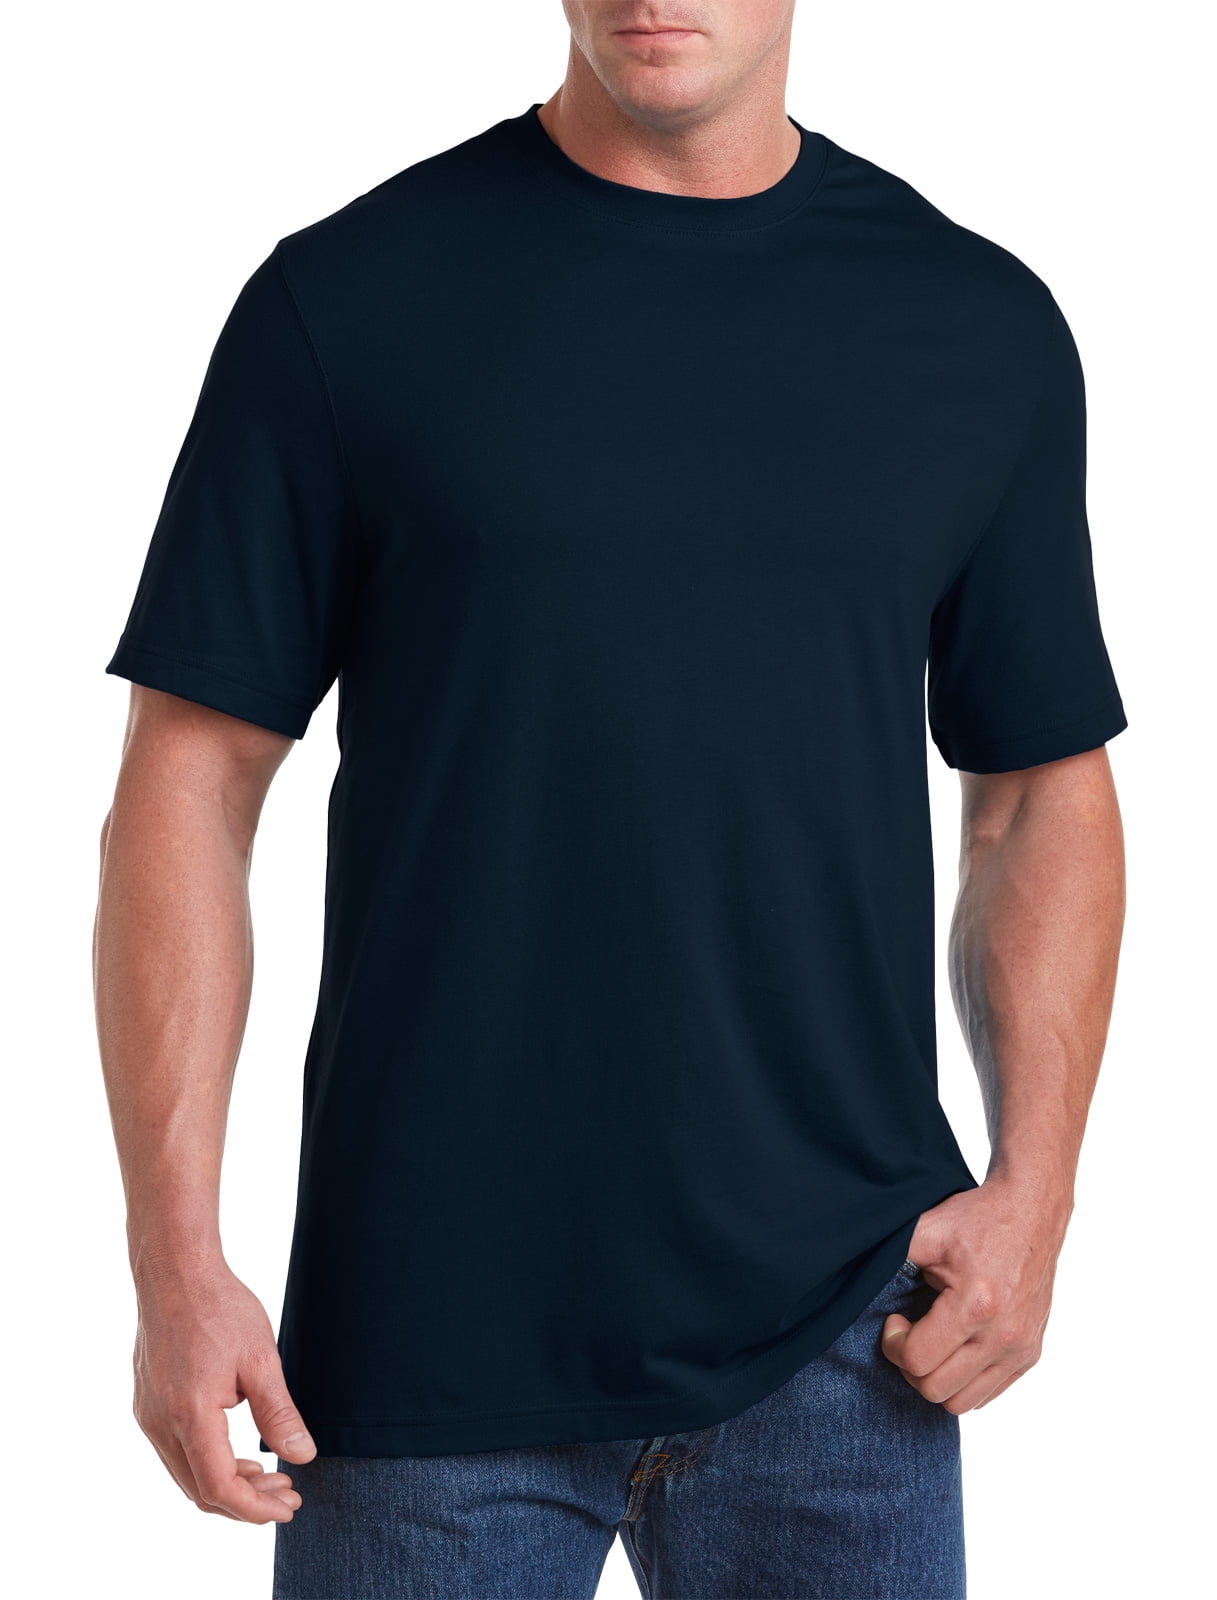 Harbor Bay by DXL Big and Tall Men's Wicking No Pocket T-Shirt ...